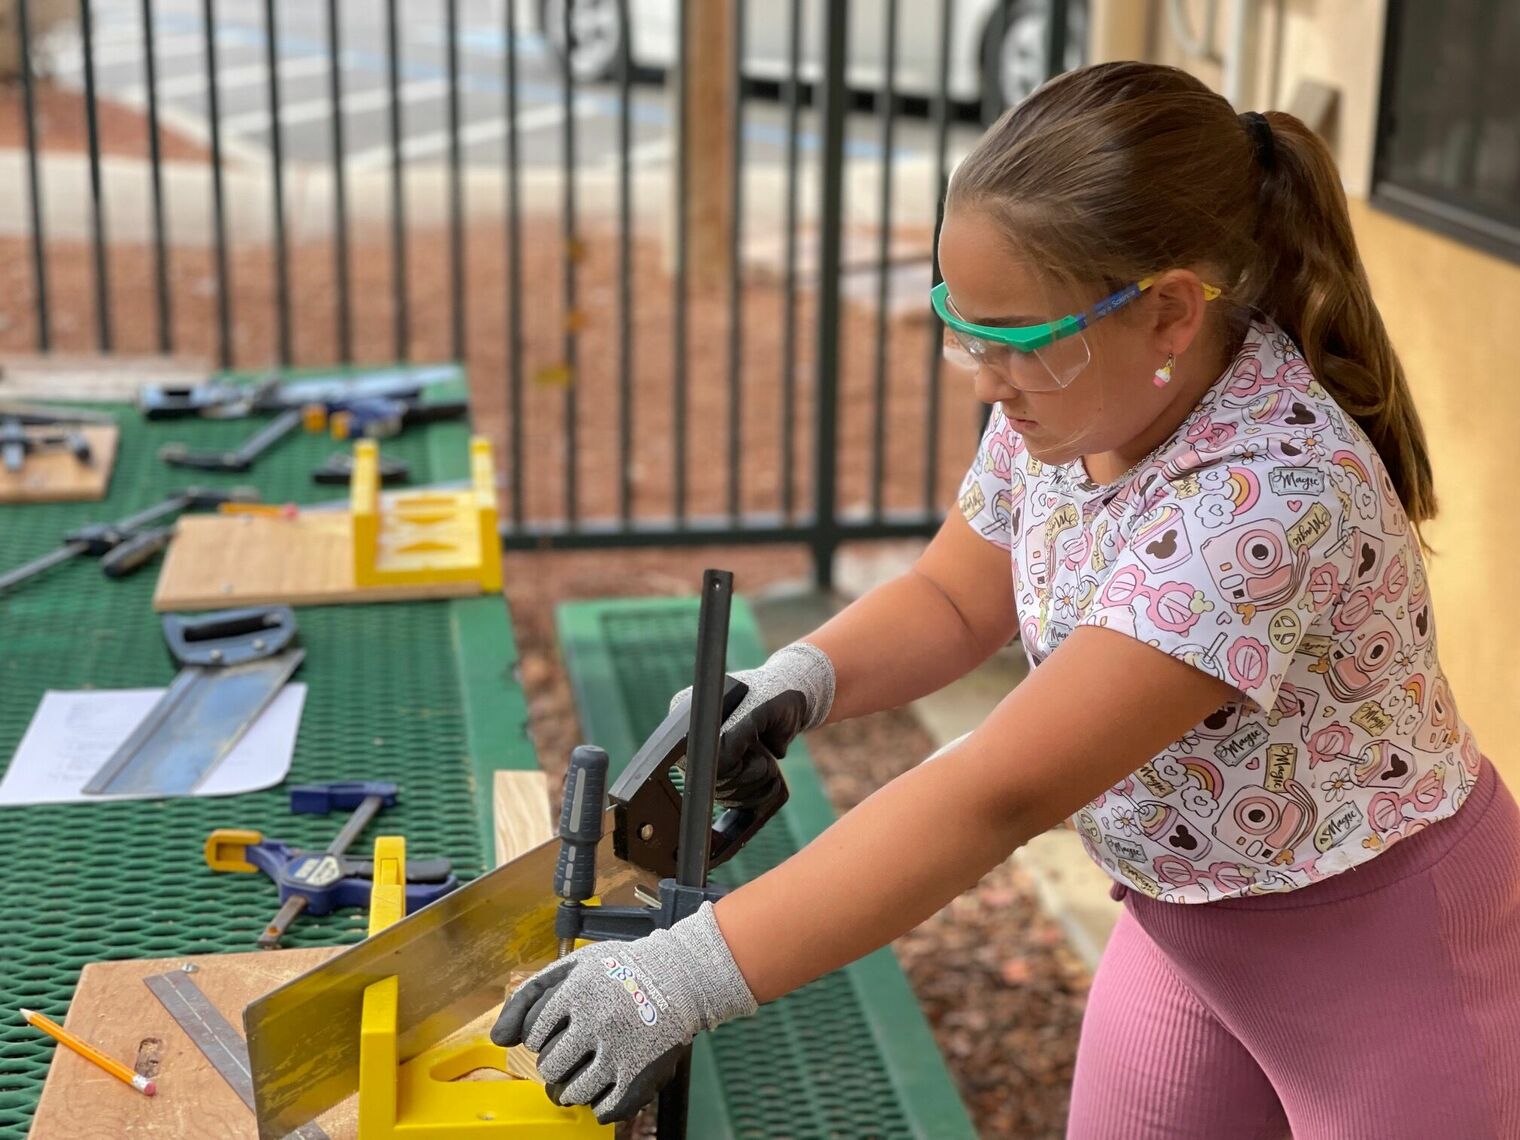 Girl wearing pink is sawing a piece of wood while wearing safety glasses. 